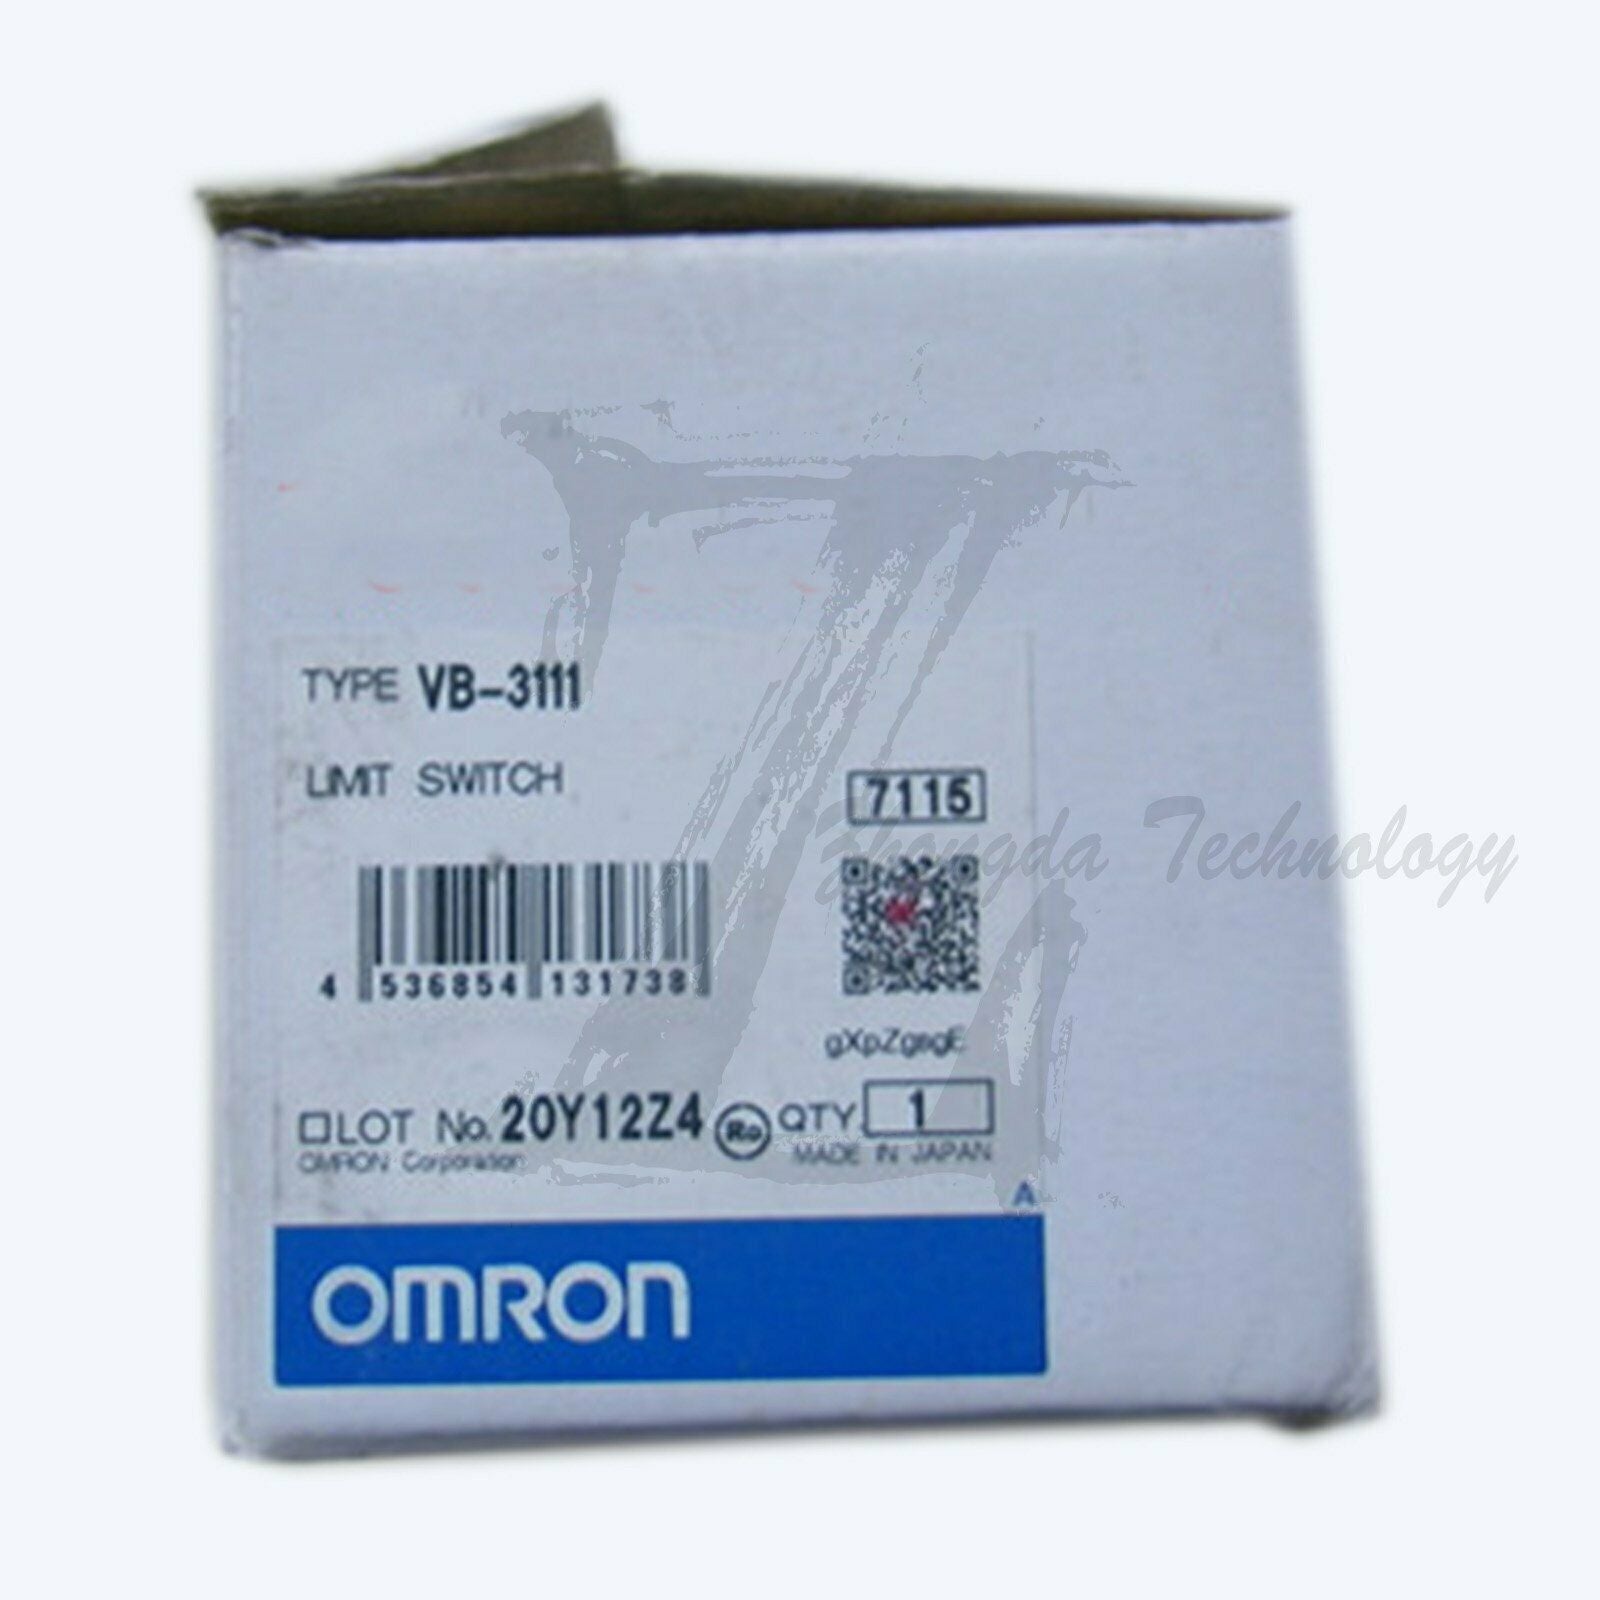 1pc new Omron limit switch VB-3111 module one year warranty KOEED 101-200, 90%, import_2020_10_10_031751, Omron, Other